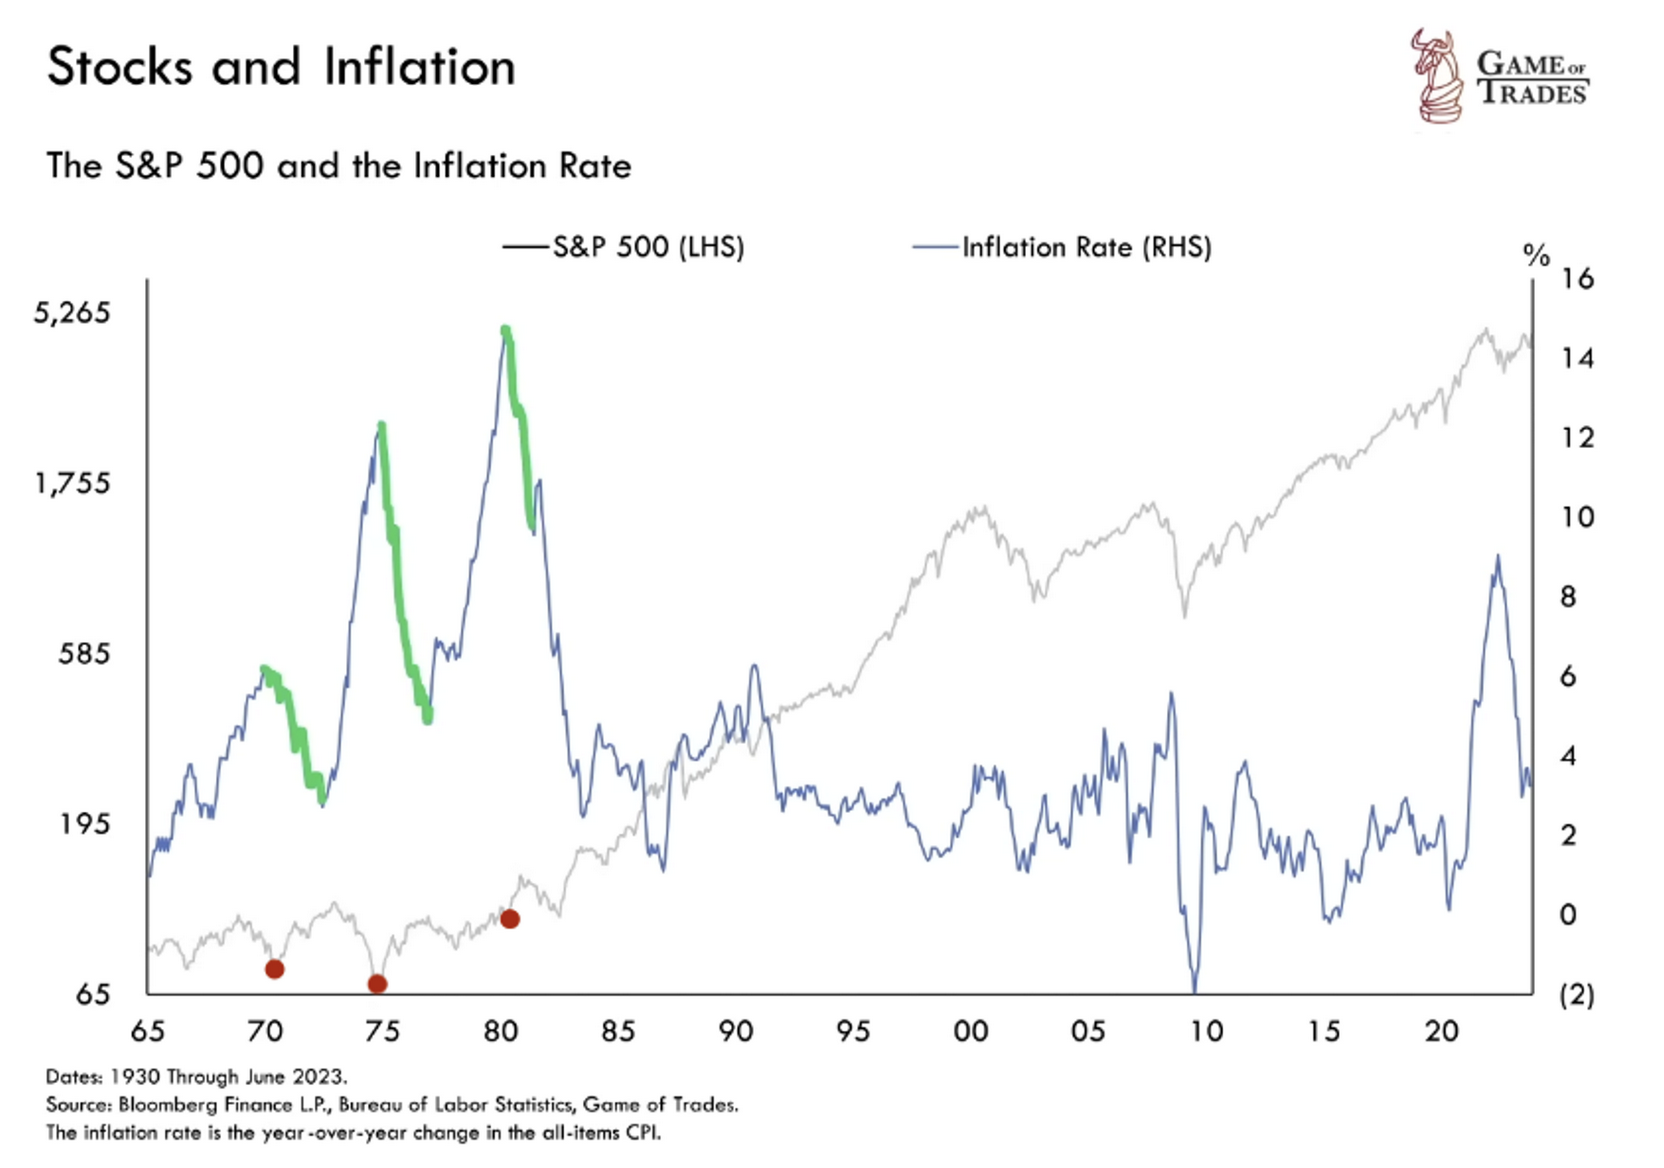 S&P 500 and inflation rate